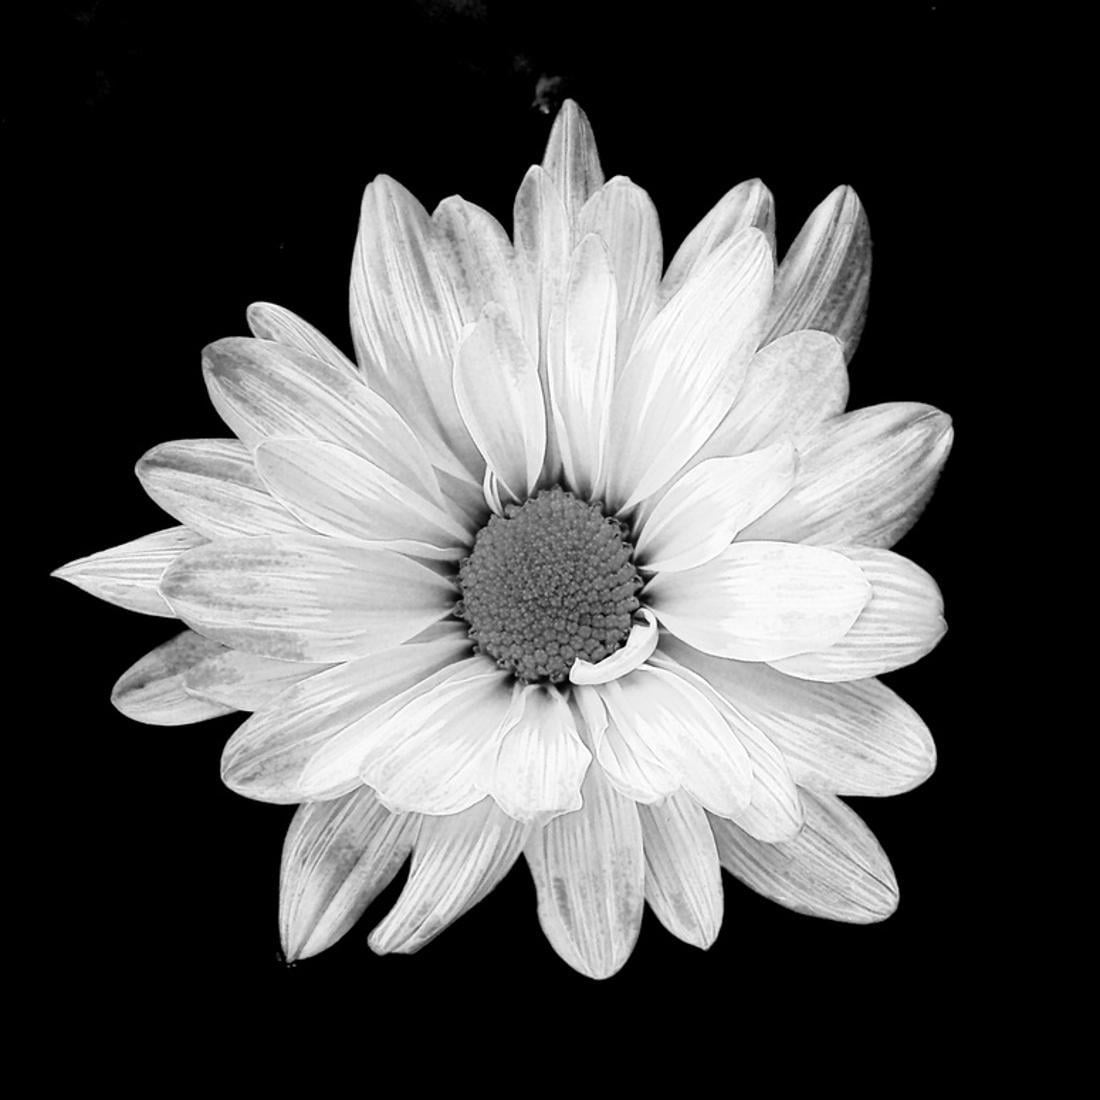 White Daisy Flower Blossom Black and White Photo Print Wall Art By Gail